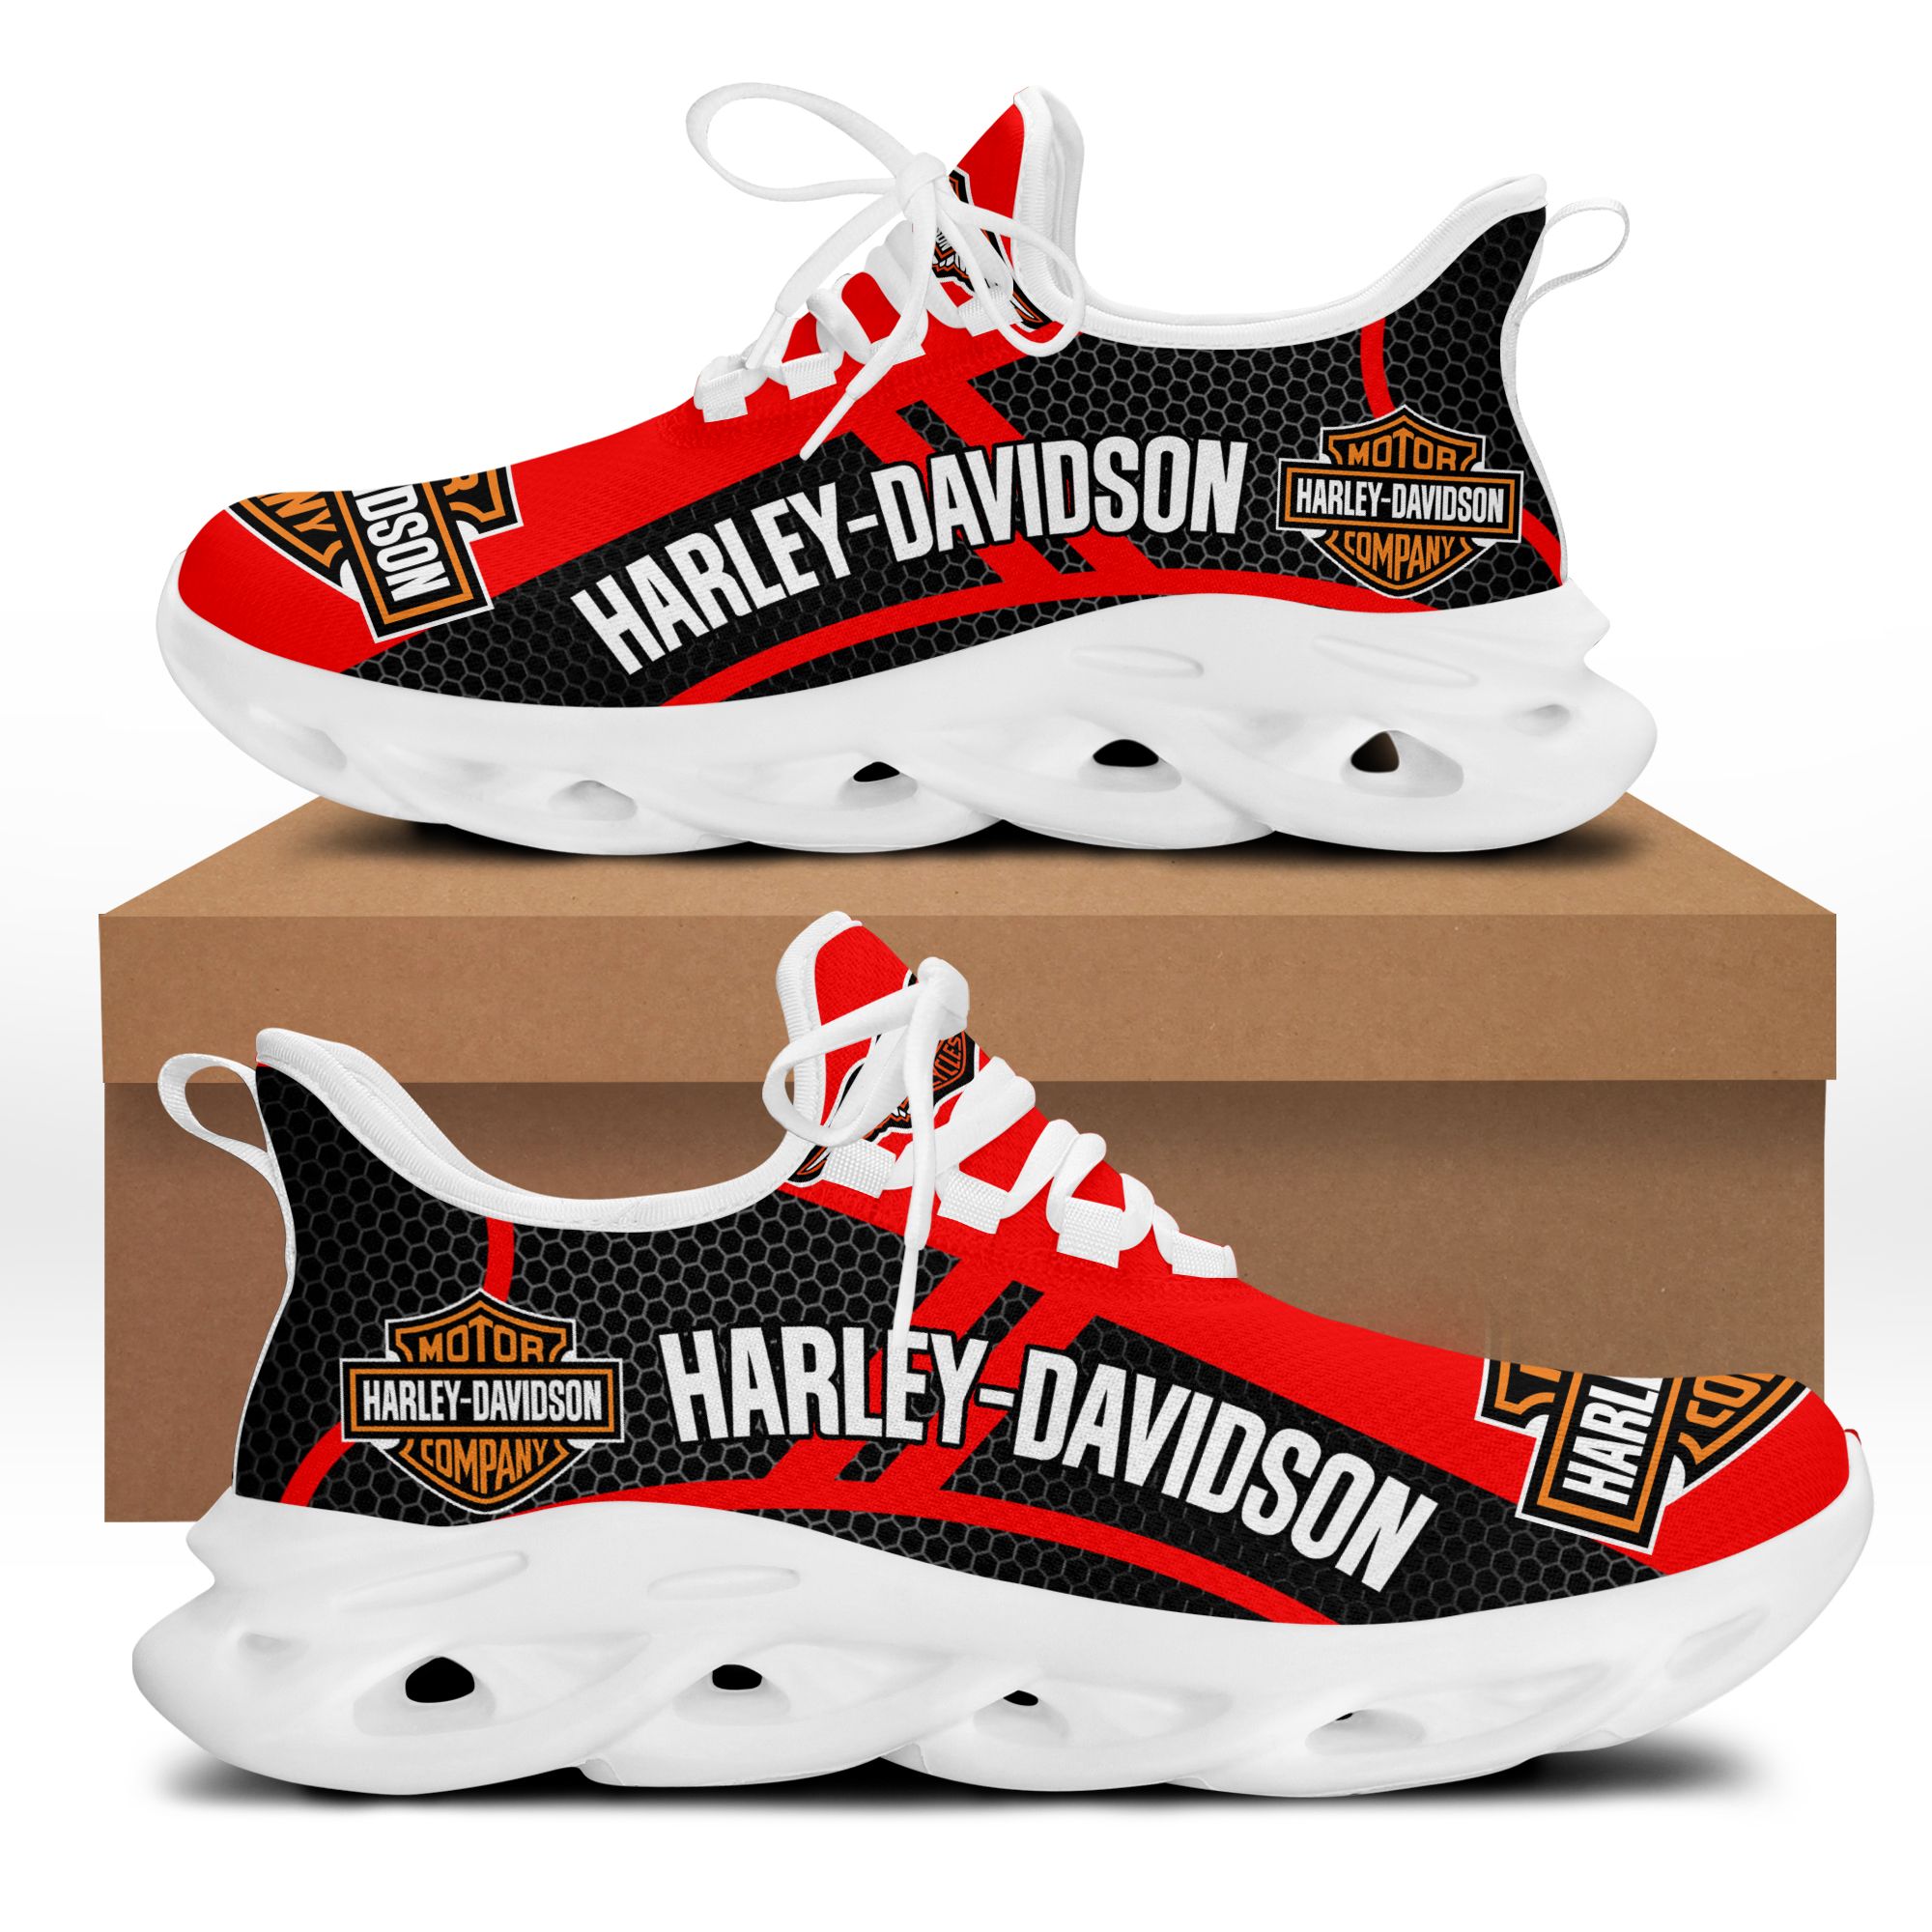 HARLEY DAVIDSON AN-LT BS Running Shoes Ver 1 (Red) – Odbary Store